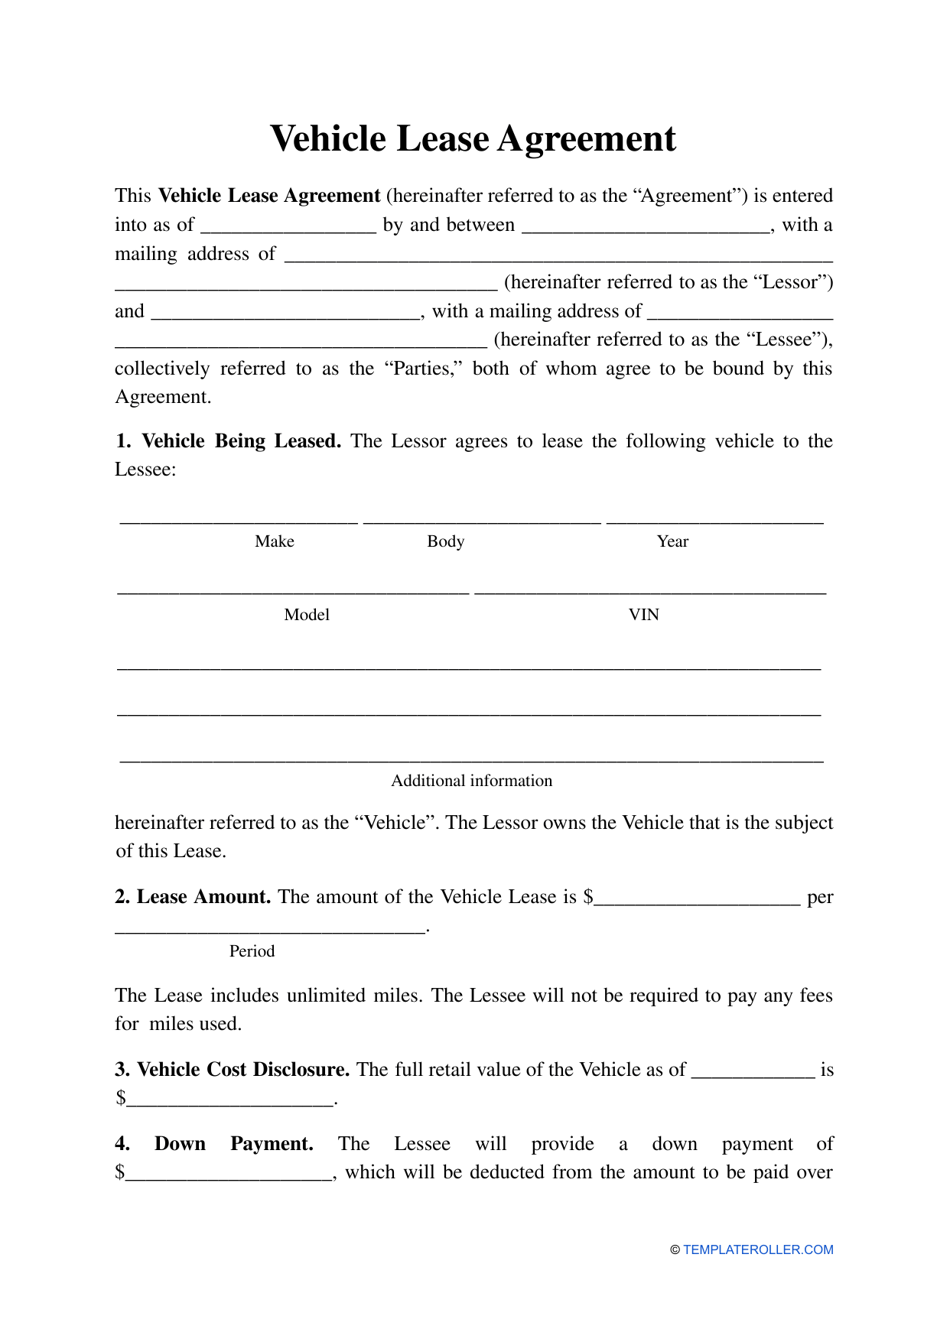 Vehicle Lease Agreement Template Download Printable PDF In car hire agreement template